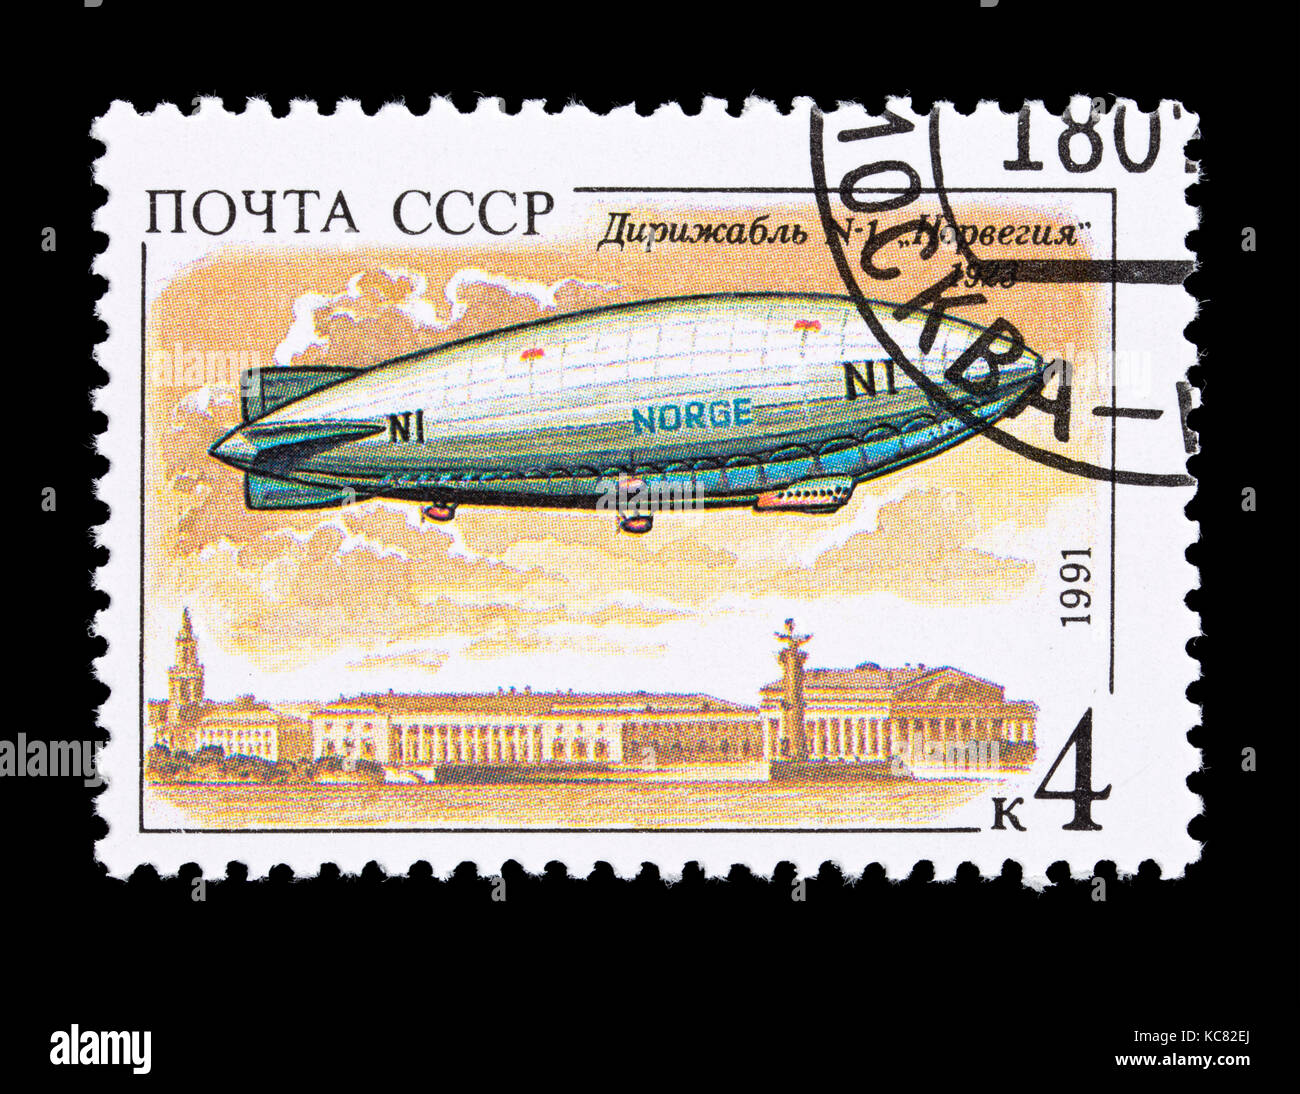 Postage stamp from the Soviet Union (USSR) depicting the airship Norge, 1923. Stock Photo